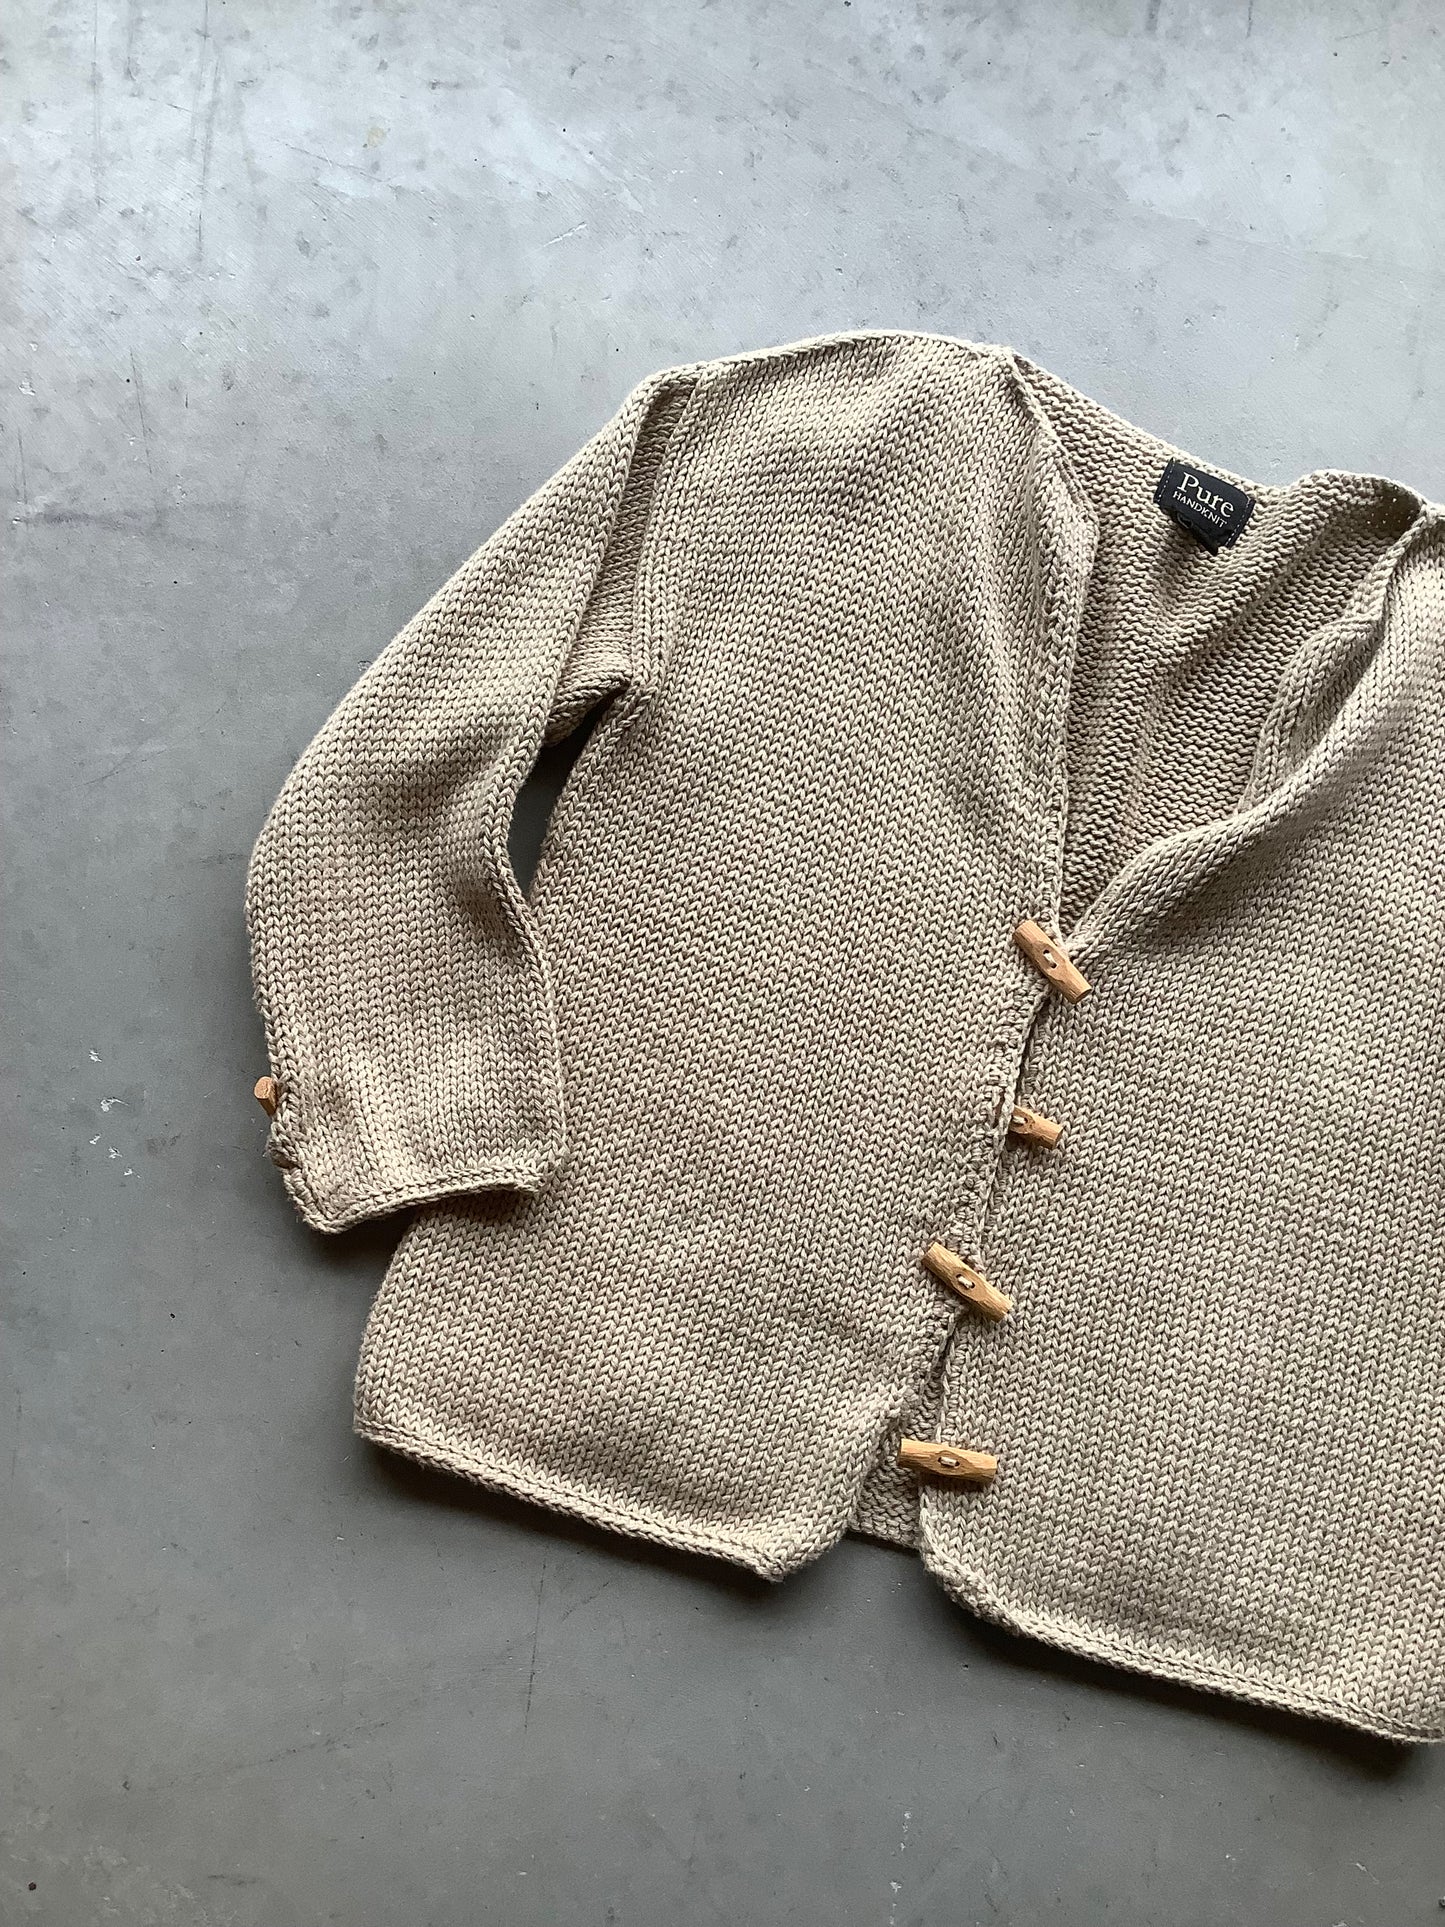 Tan cardigan with wooden toggles